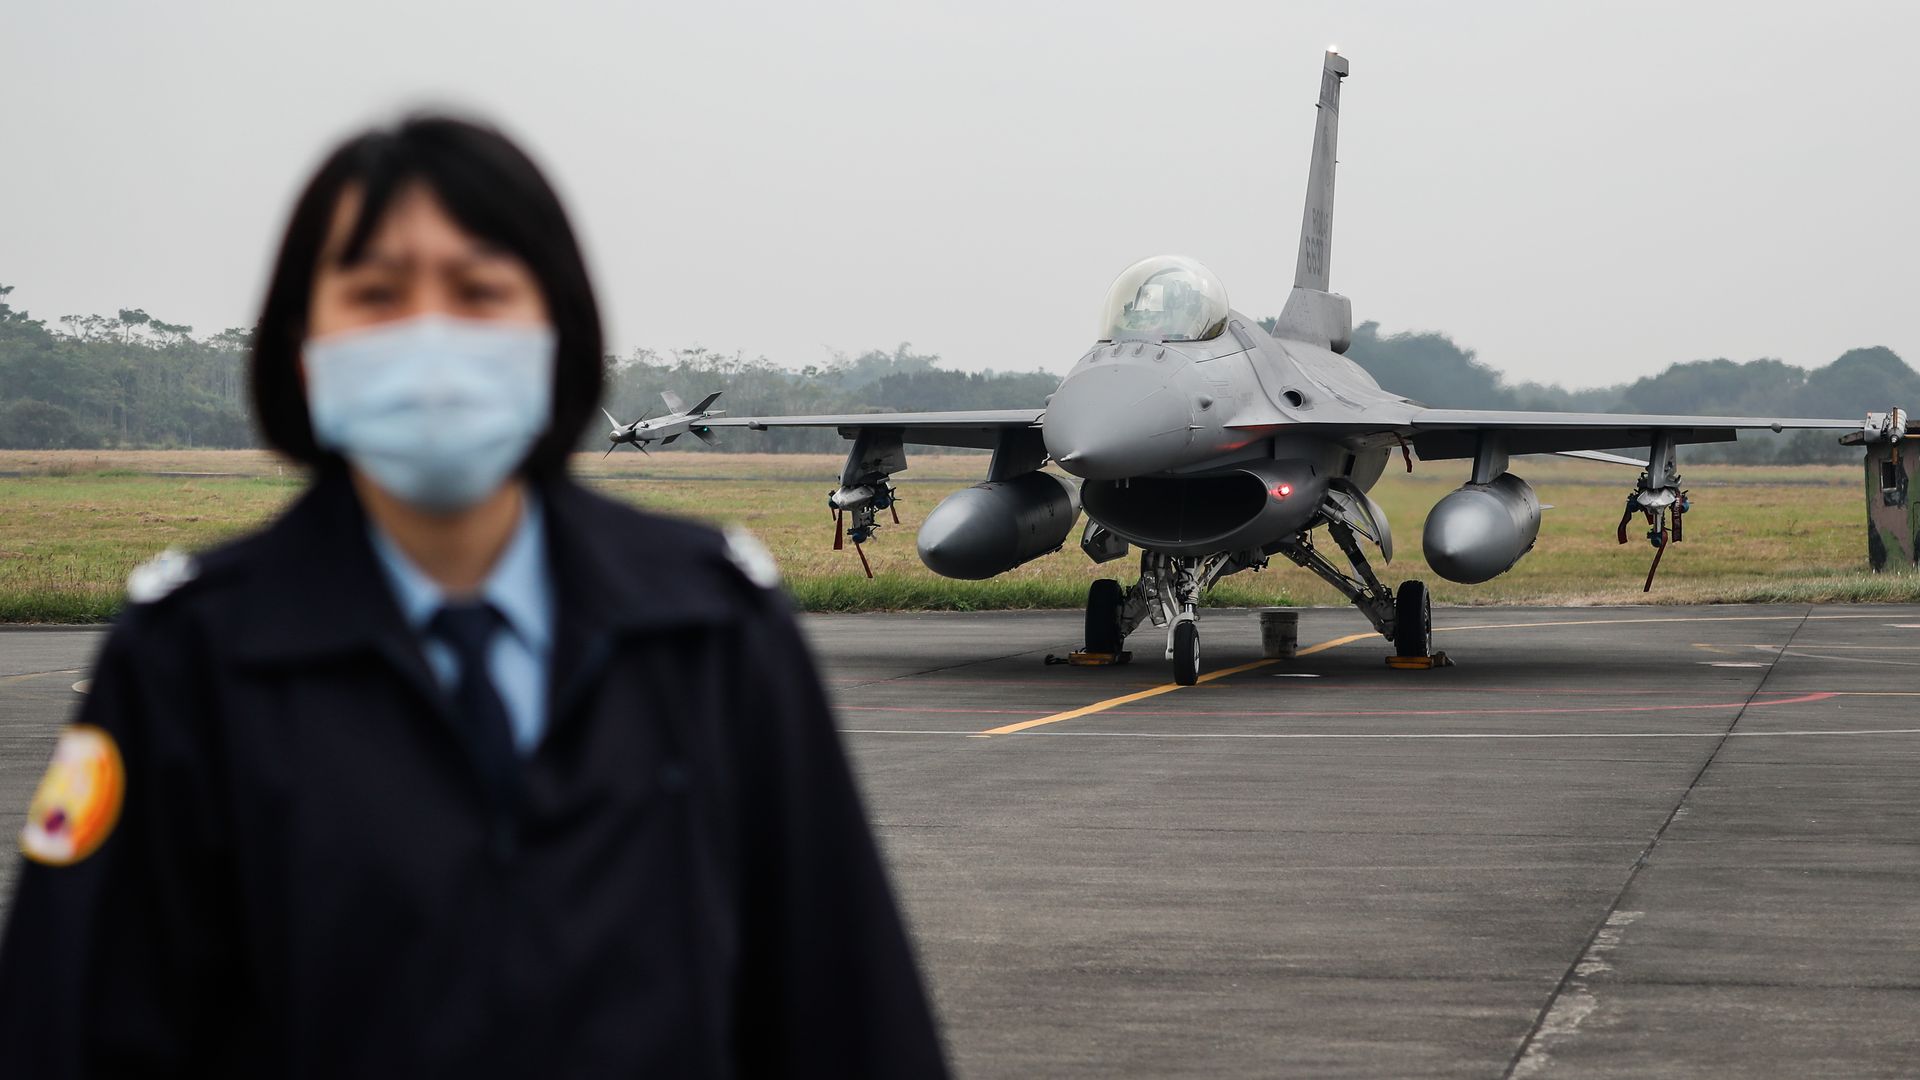 F-16V jet fighters taxi on the runway at the Air Force base, as the Taiwanese military holds a drill  in Chiayi, Taiwan, on Jan 5, 2022. 